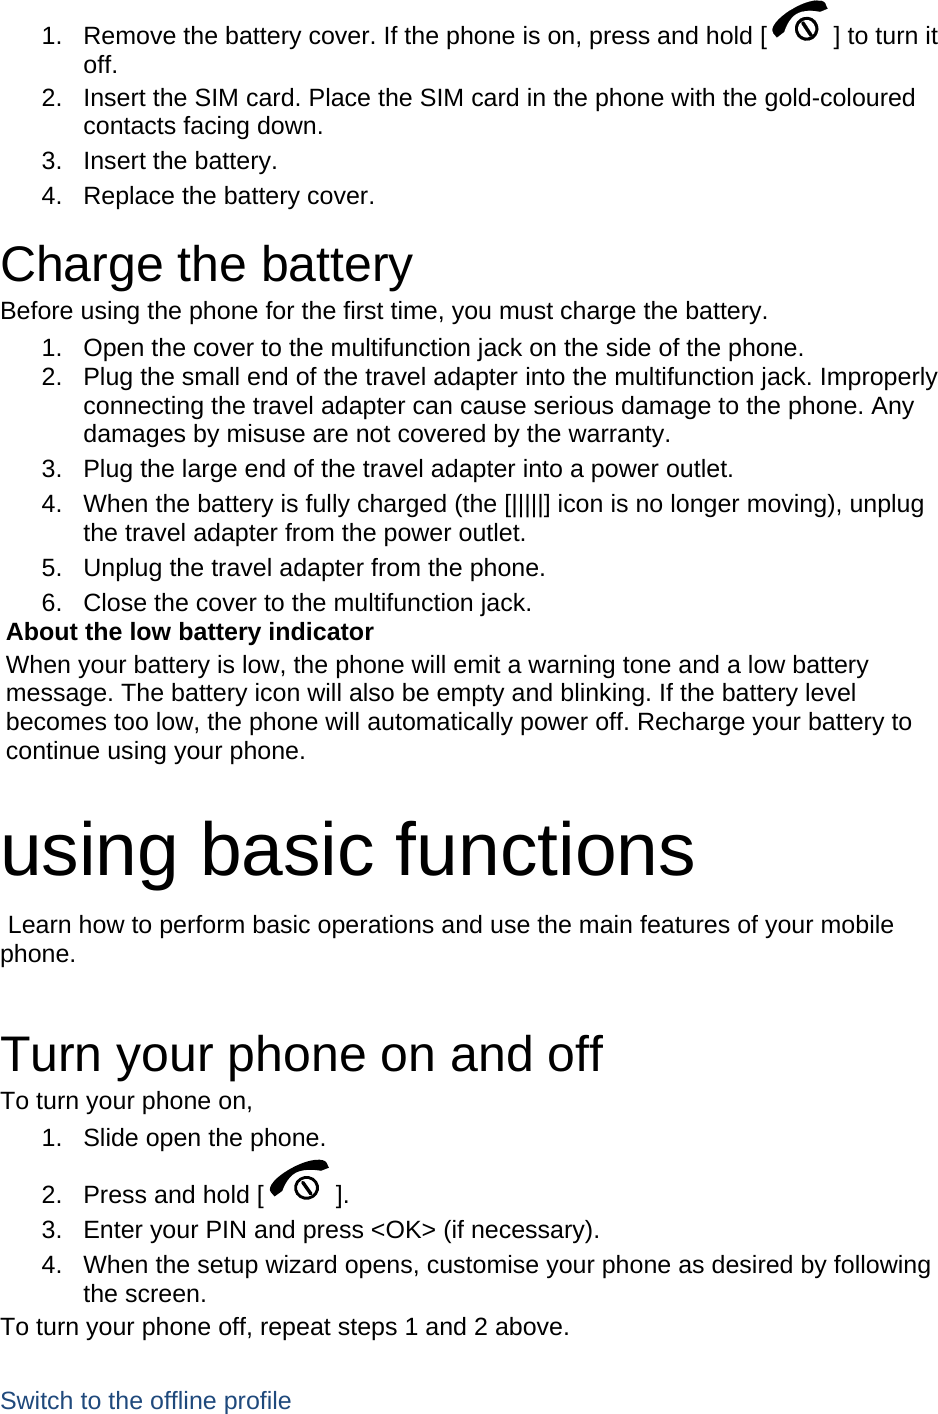 1.  Remove the battery cover. If the phone is on, press and hold [ ] to turn it off. 2.  Insert the SIM card. Place the SIM card in the phone with the gold-coloured contacts facing down. 3. Insert the battery. 4.  Replace the battery cover.  Charge the battery Before using the phone for the first time, you must charge the battery. 1.  Open the cover to the multifunction jack on the side of the phone. 2.  Plug the small end of the travel adapter into the multifunction jack. Improperly connecting the travel adapter can cause serious damage to the phone. Any damages by misuse are not covered by the warranty. 3.  Plug the large end of the travel adapter into a power outlet. 4.  When the battery is fully charged (the [|||||] icon is no longer moving), unplug the travel adapter from the power outlet. 5.  Unplug the travel adapter from the phone. 6.  Close the cover to the multifunction jack. About the low battery indicator When your battery is low, the phone will emit a warning tone and a low battery message. The battery icon will also be empty and blinking. If the battery level becomes too low, the phone will automatically power off. Recharge your battery to continue using your phone.  using basic functions  Learn how to perform basic operations and use the main features of your mobile phone.   Turn your phone on and off To turn your phone on, 1.  Slide open the phone. 2.  Press and hold [ ]. 3.  Enter your PIN and press &lt;OK&gt; (if necessary). 4.  When the setup wizard opens, customise your phone as desired by following the screen. To turn your phone off, repeat steps 1 and 2 above.  Switch to the offline profile 